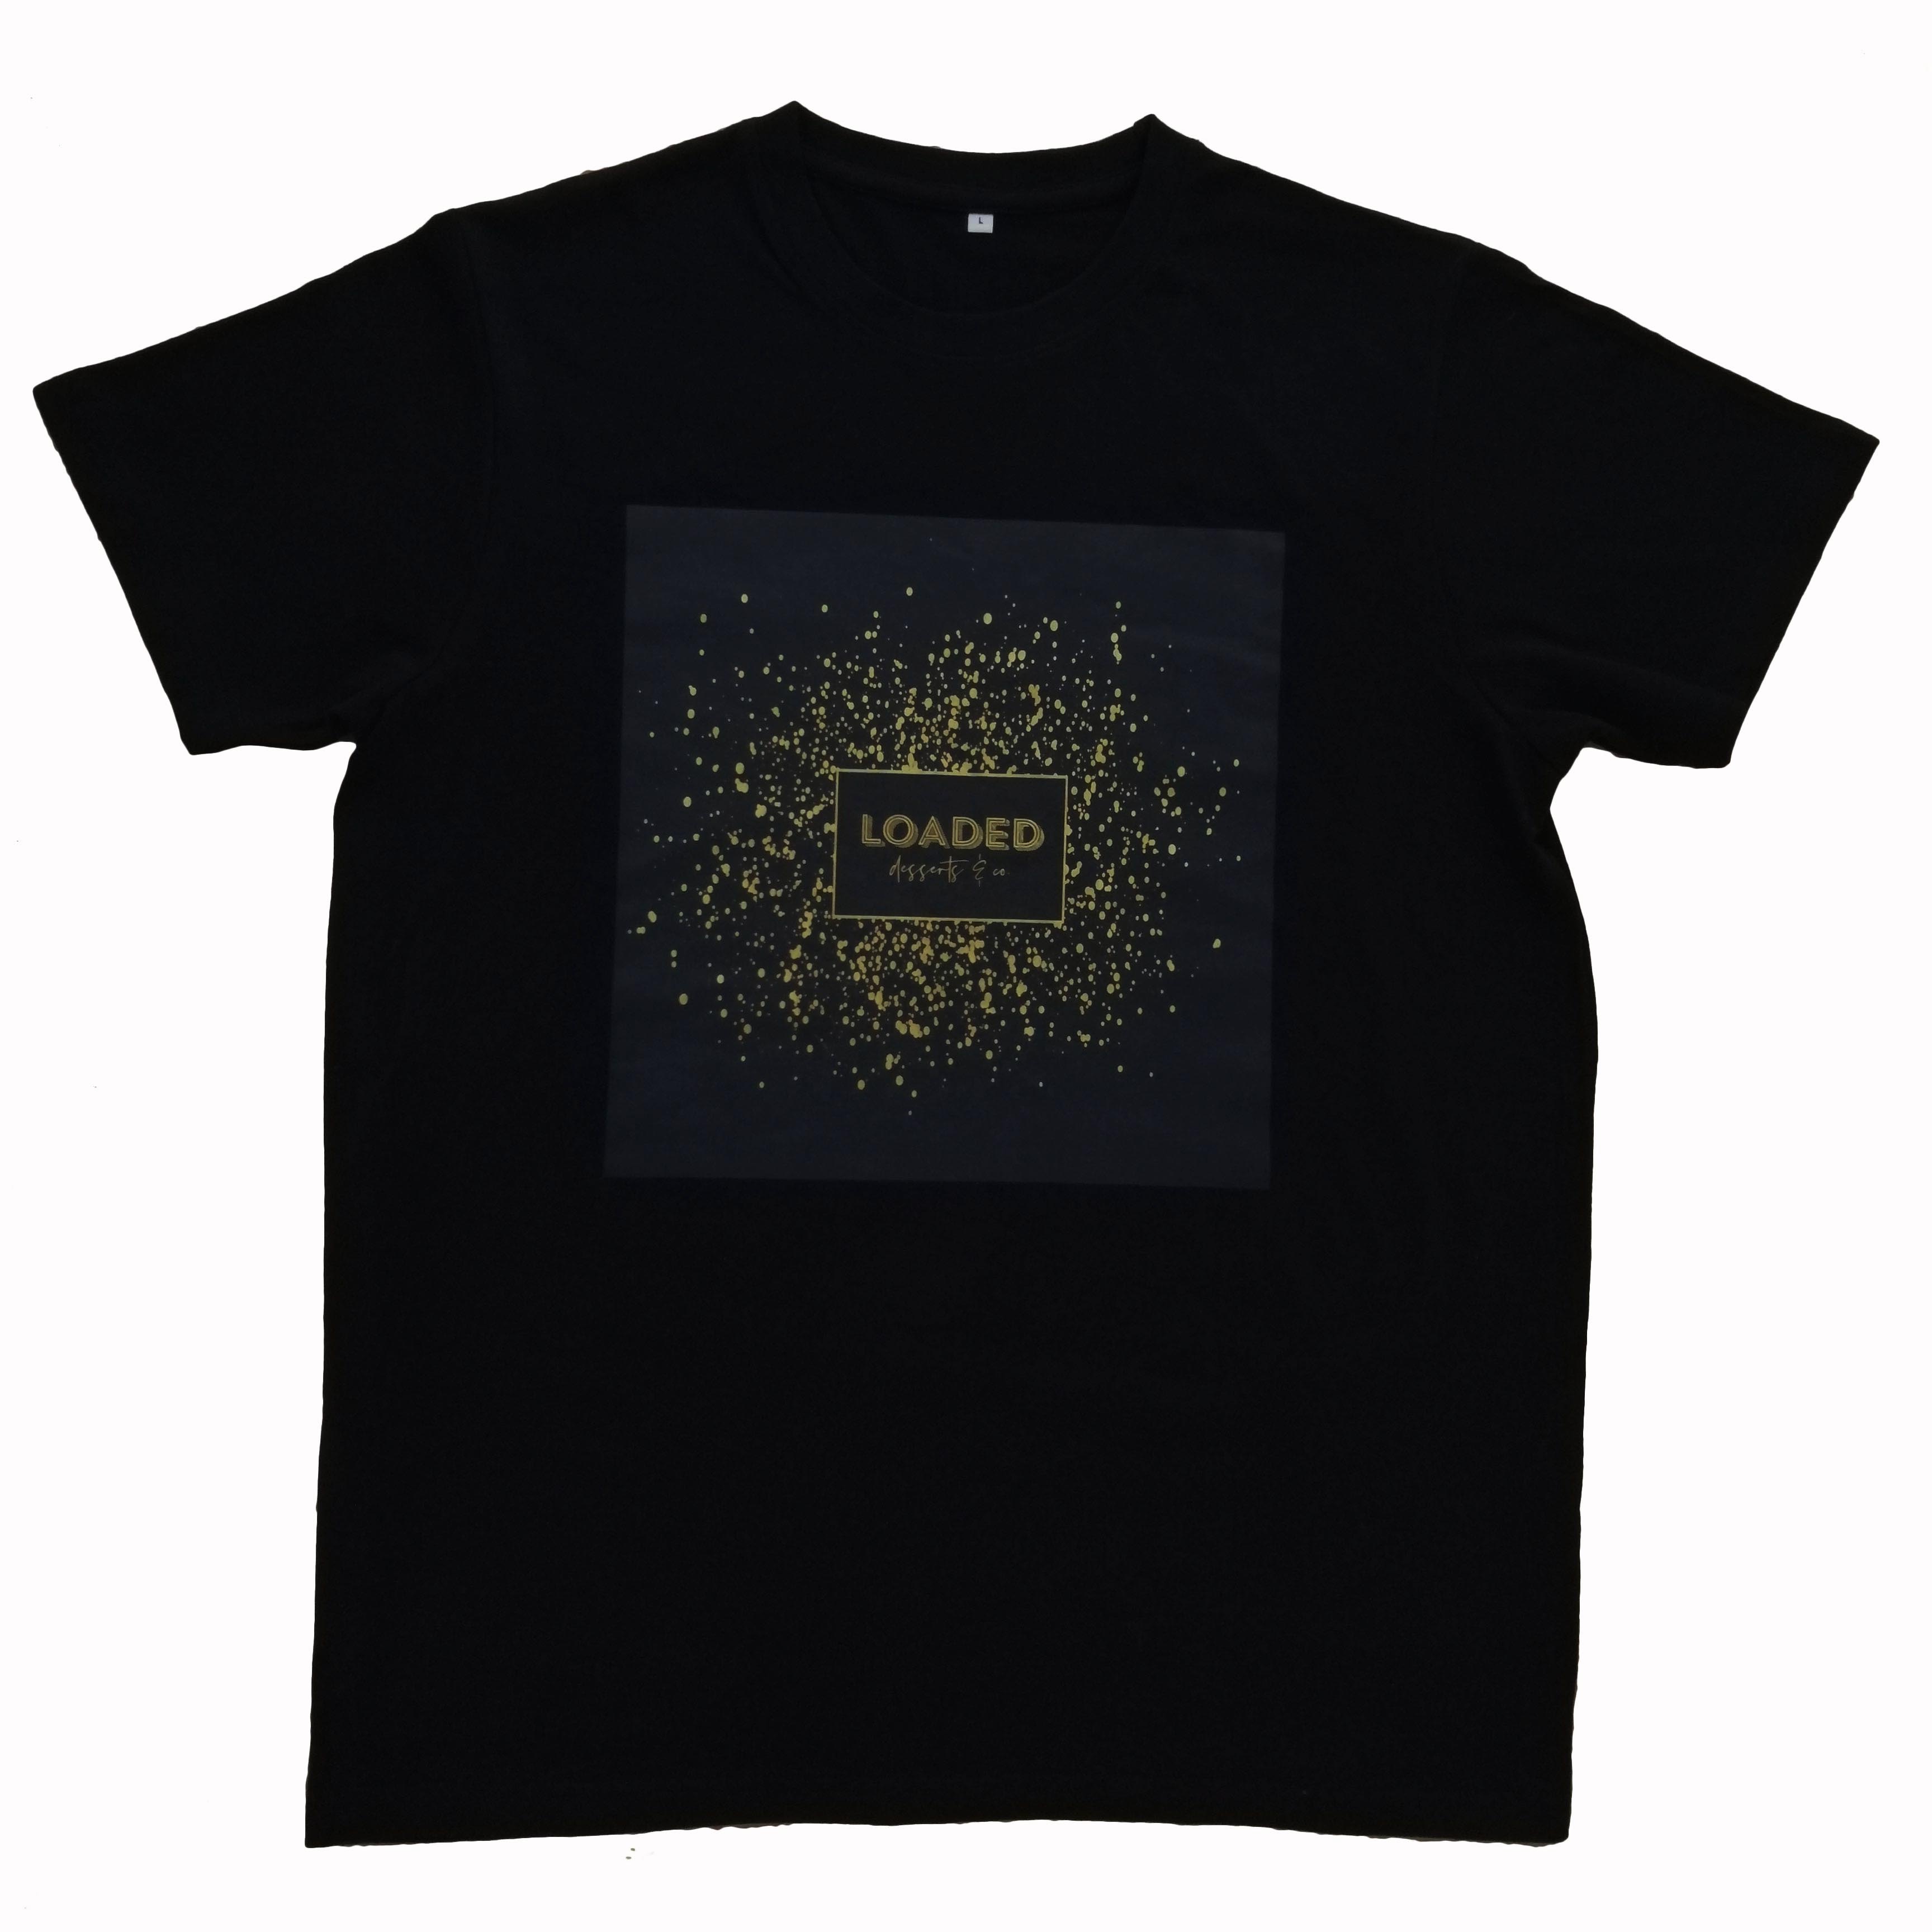 High Quality Gold Foil Printing T Shirt Customize Cool Shiny Golden Foil Printed Combed Cotton Black T-shirts For Men